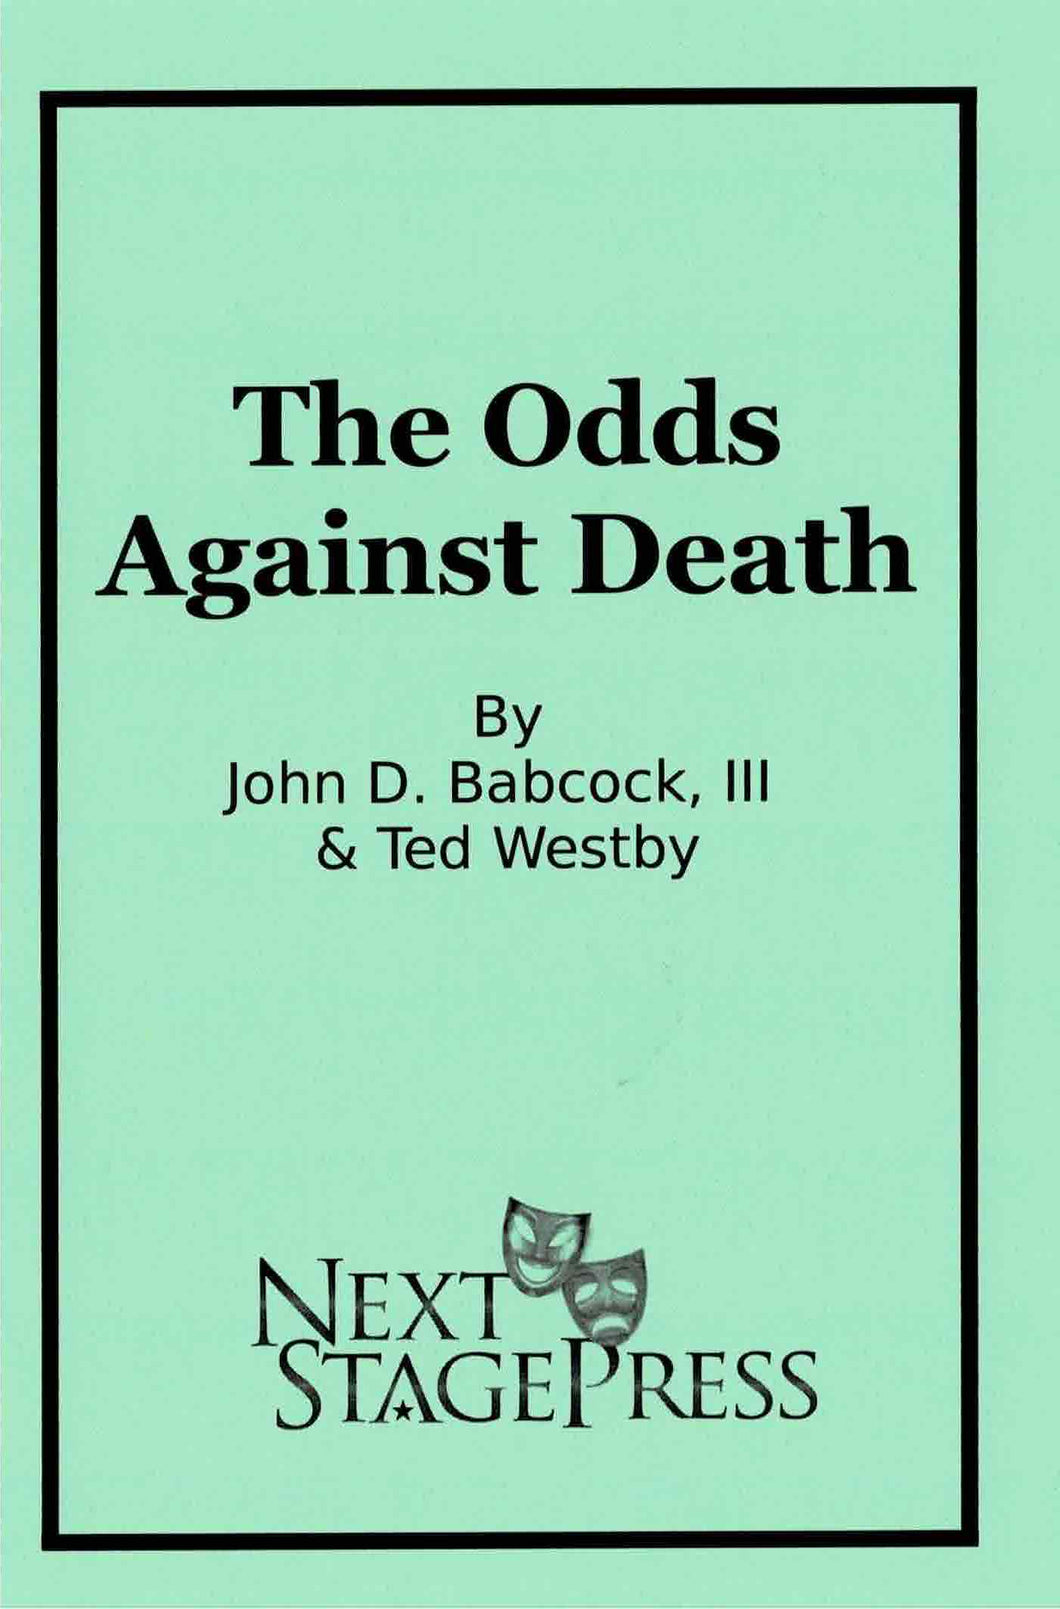 The Odds Against Death